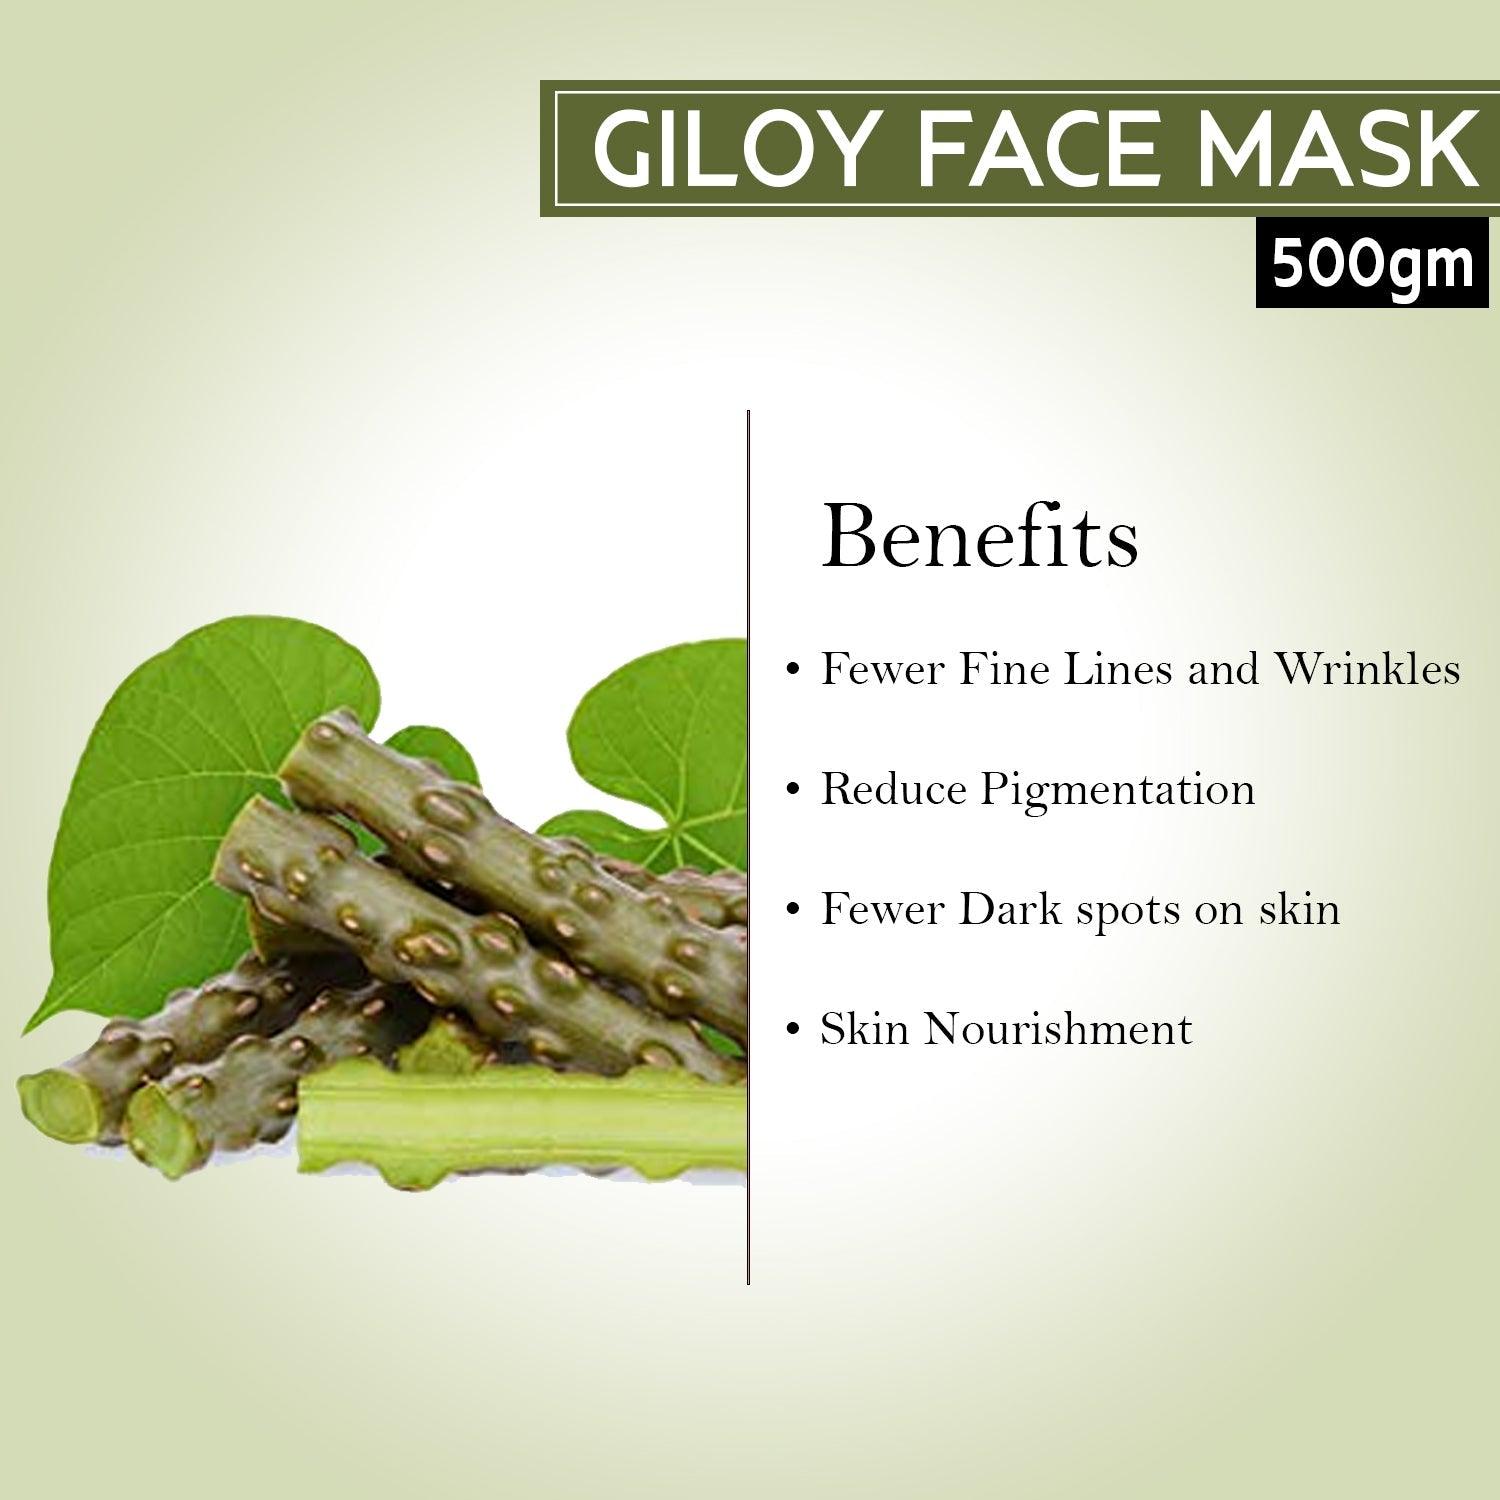 Giloy Face Mask for Glowing Skin 500gm - Pink Root